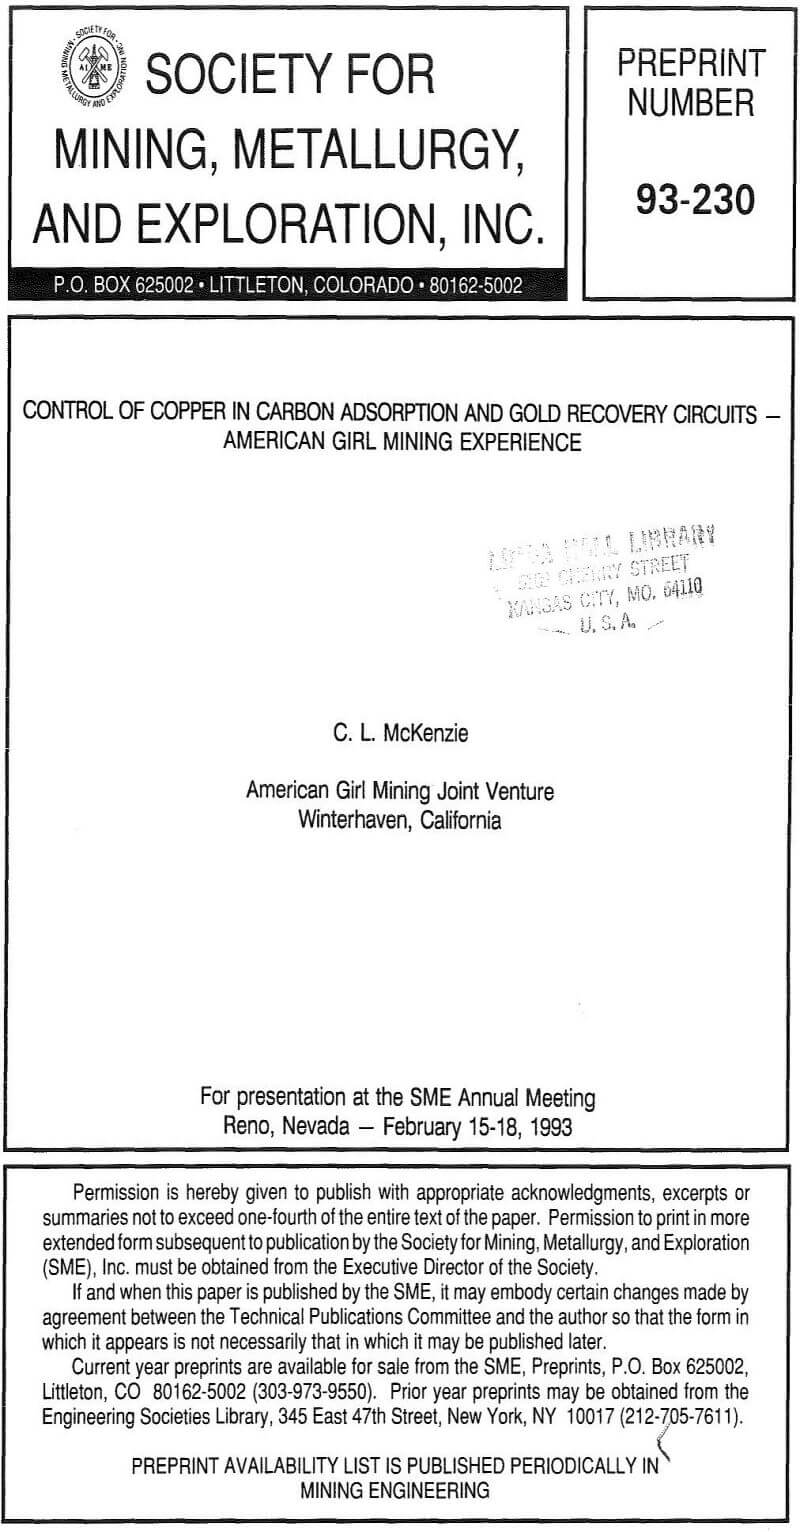 carbon adsorption and gold recovery circuits